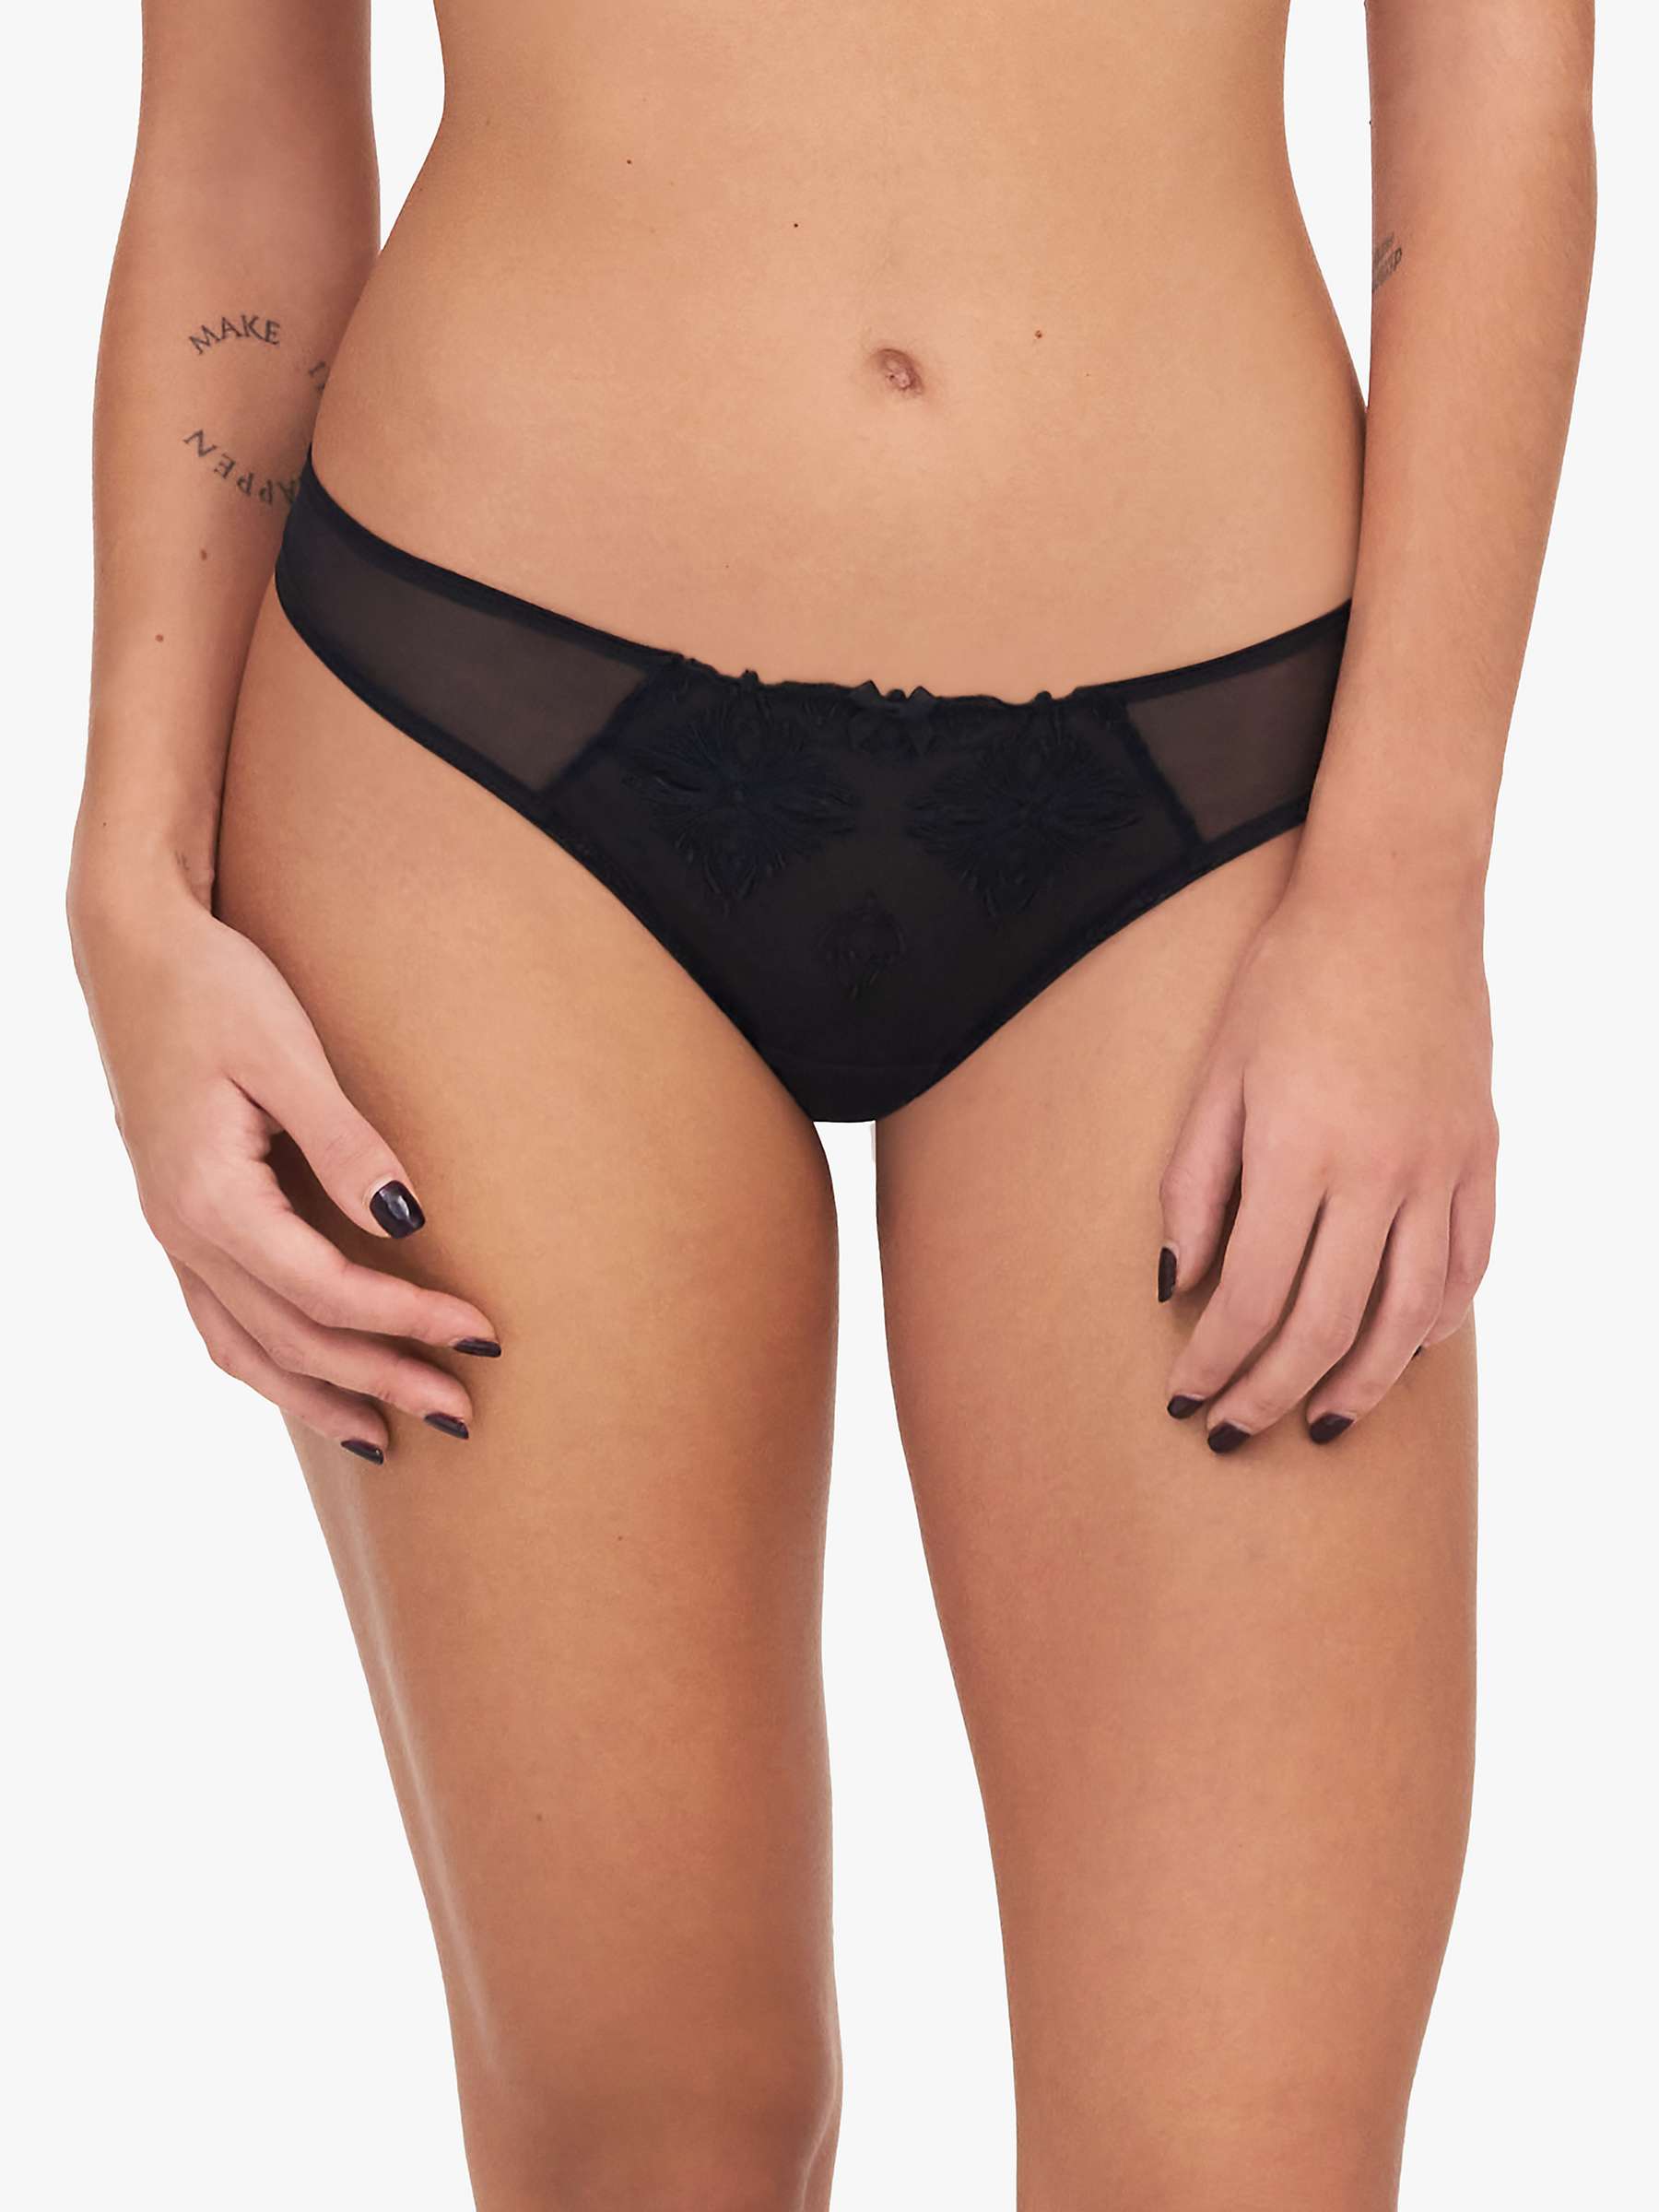 Buy Chantelle Champs Elysees Tanga Knickers Online at johnlewis.com